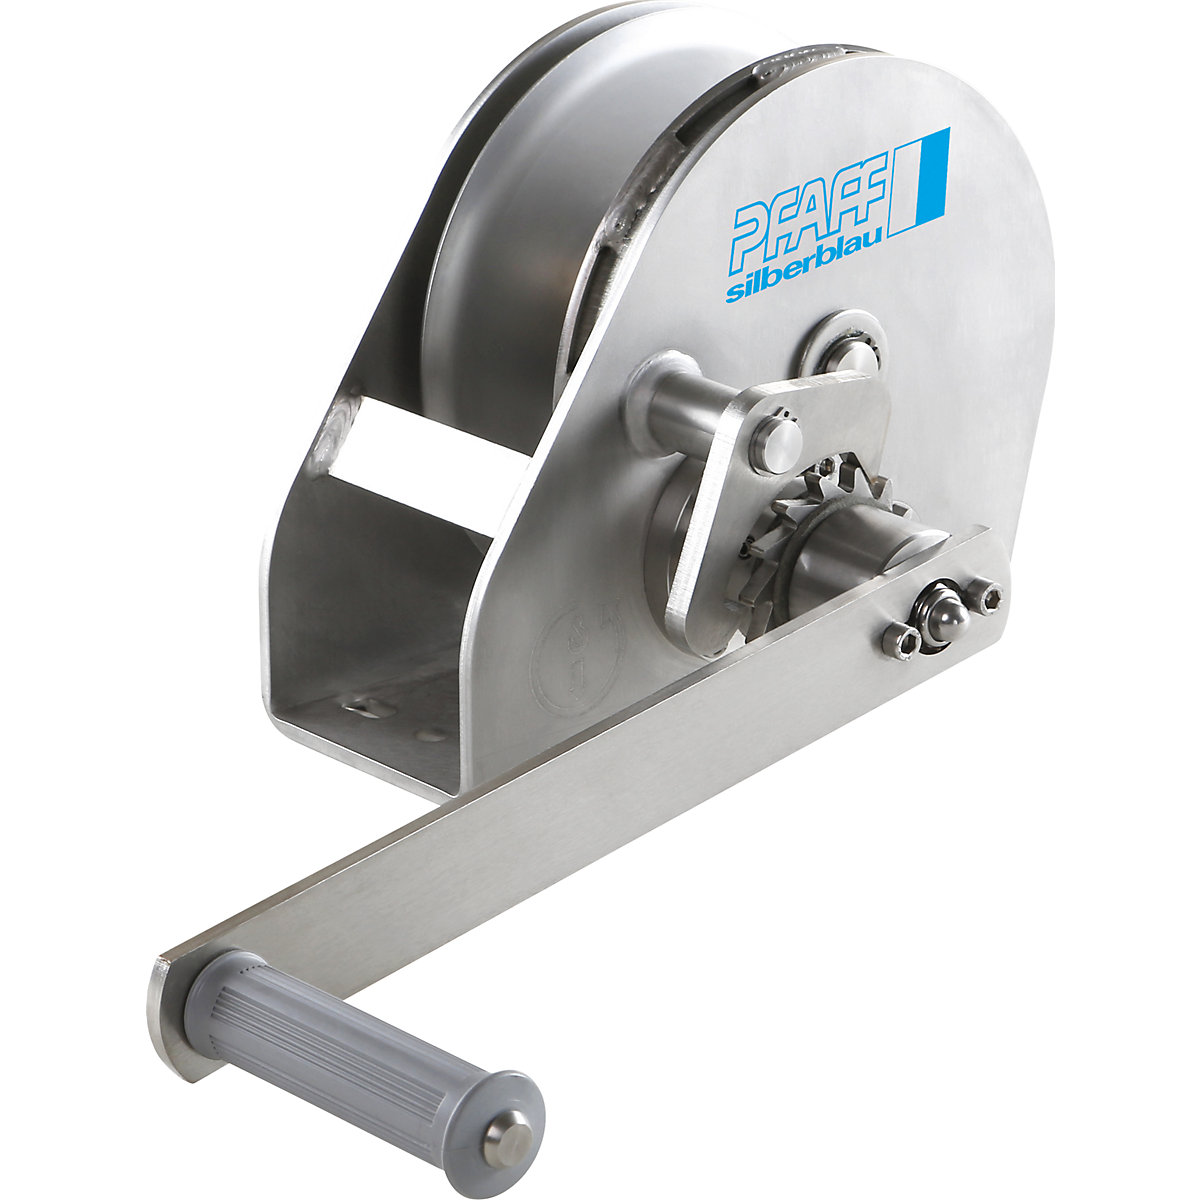 LB panel cable winch, stainless steel, max. lifting load 650 kg, 2+ items-2